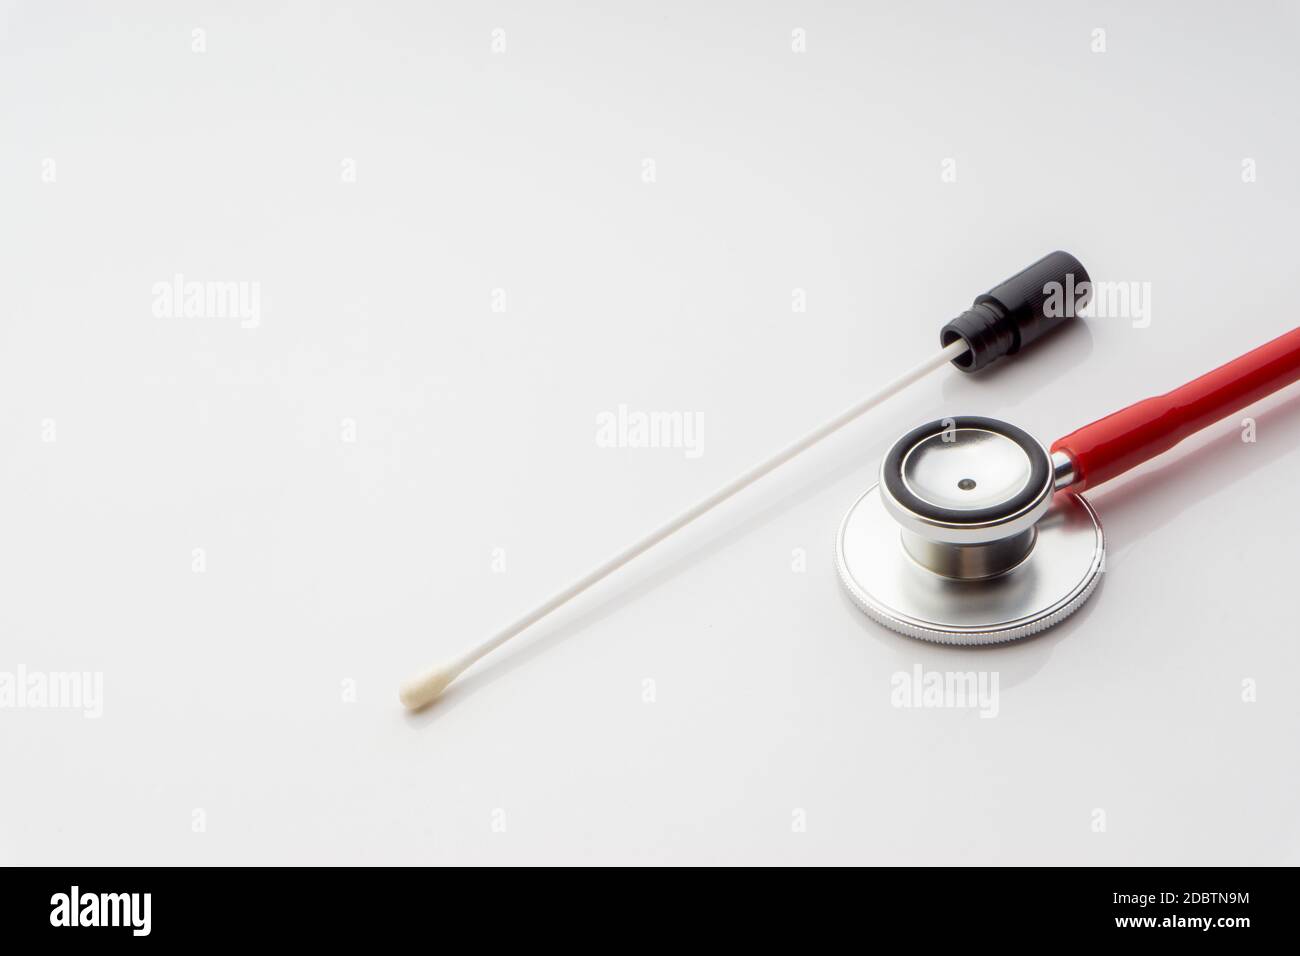 Medical swab and stethoscope on white background. Healthcare dan Copy Space concept Stock Photo